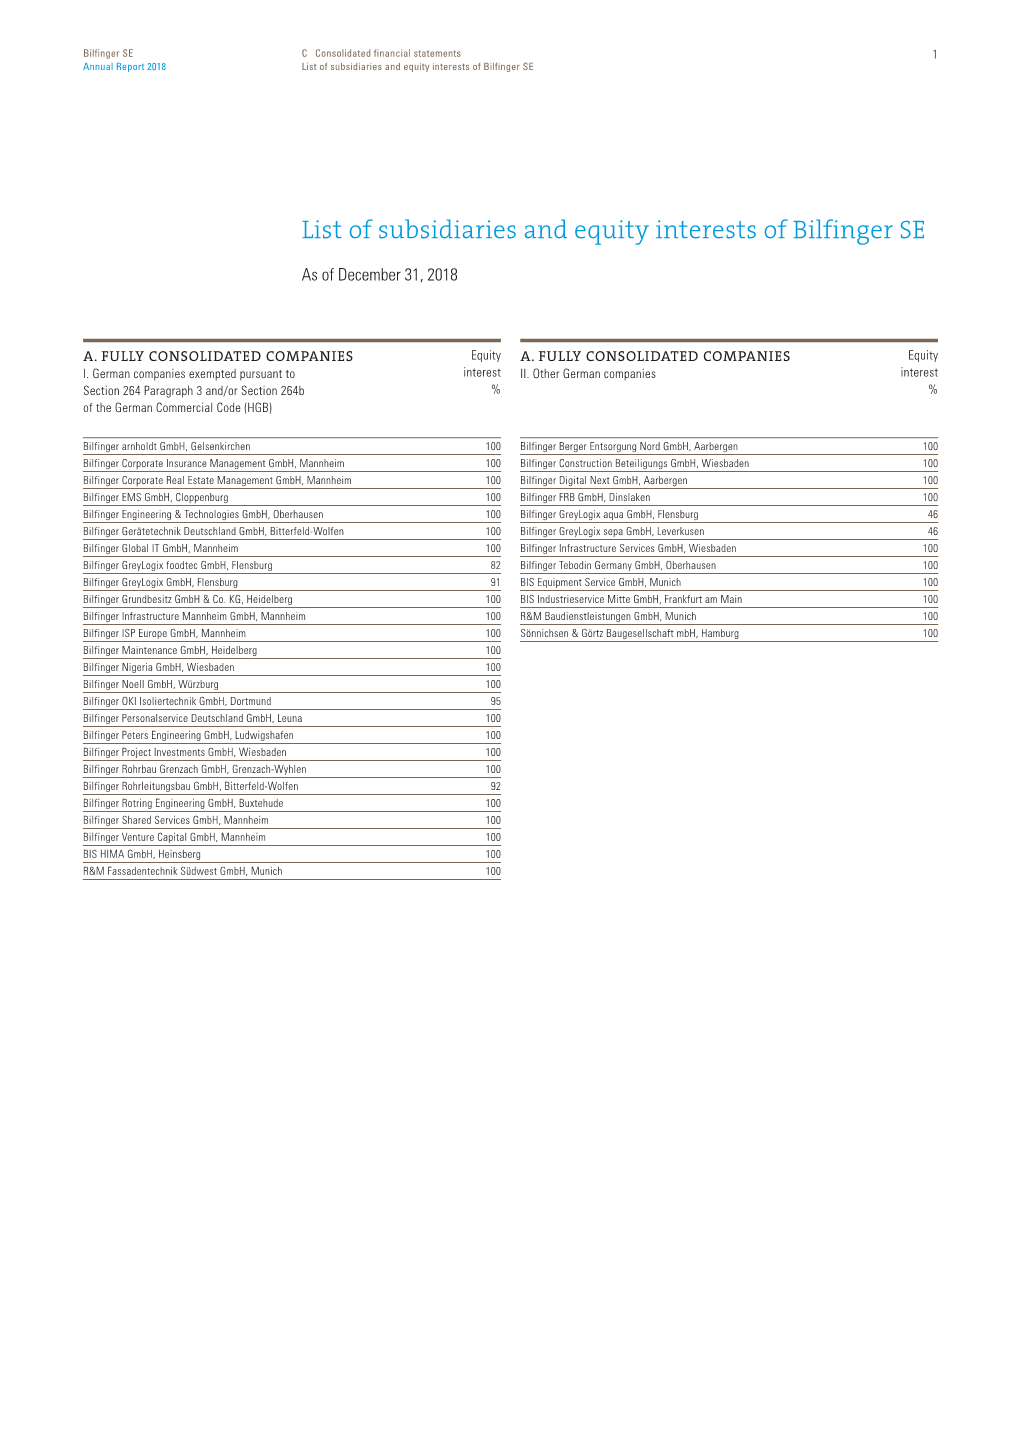 List of Subsidiaries and Equity Interests [Pdf, 40.5